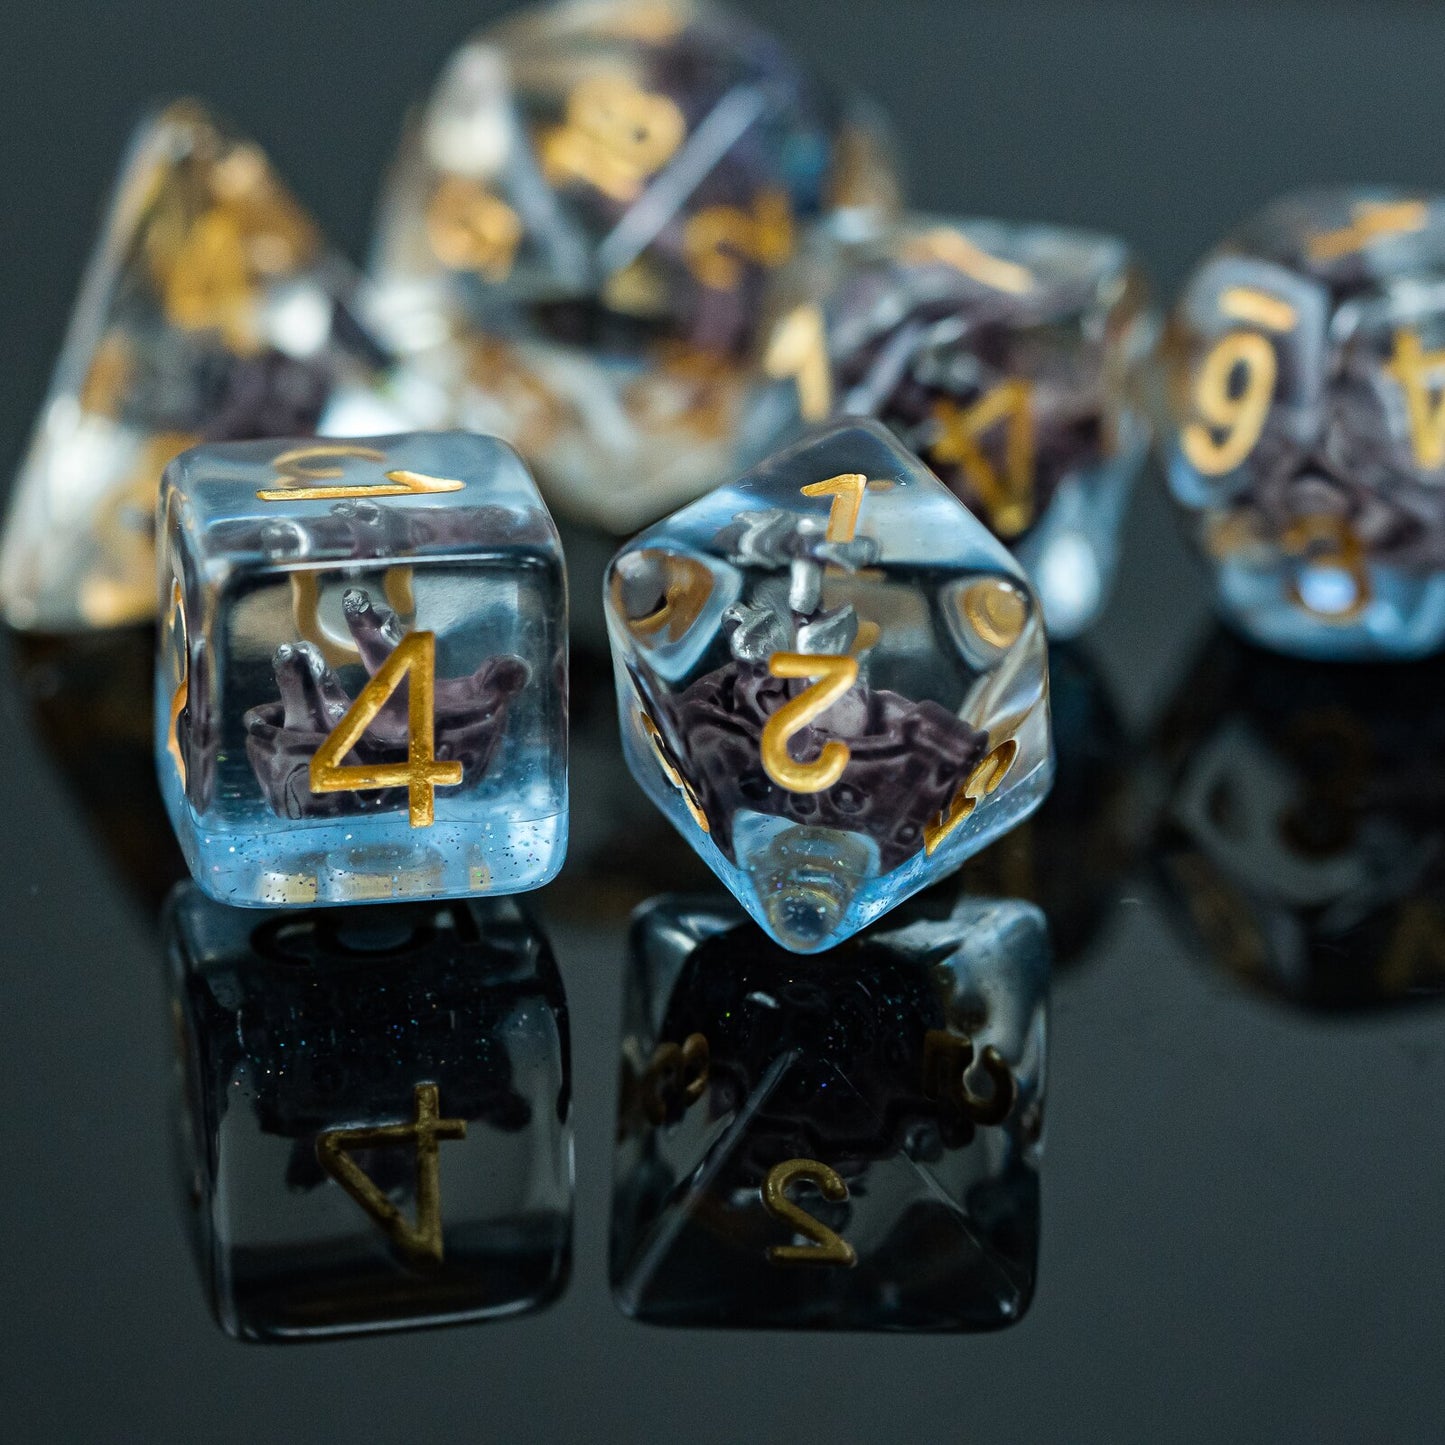 d8 and d6 highlight, sailboat dice with rest of set in background